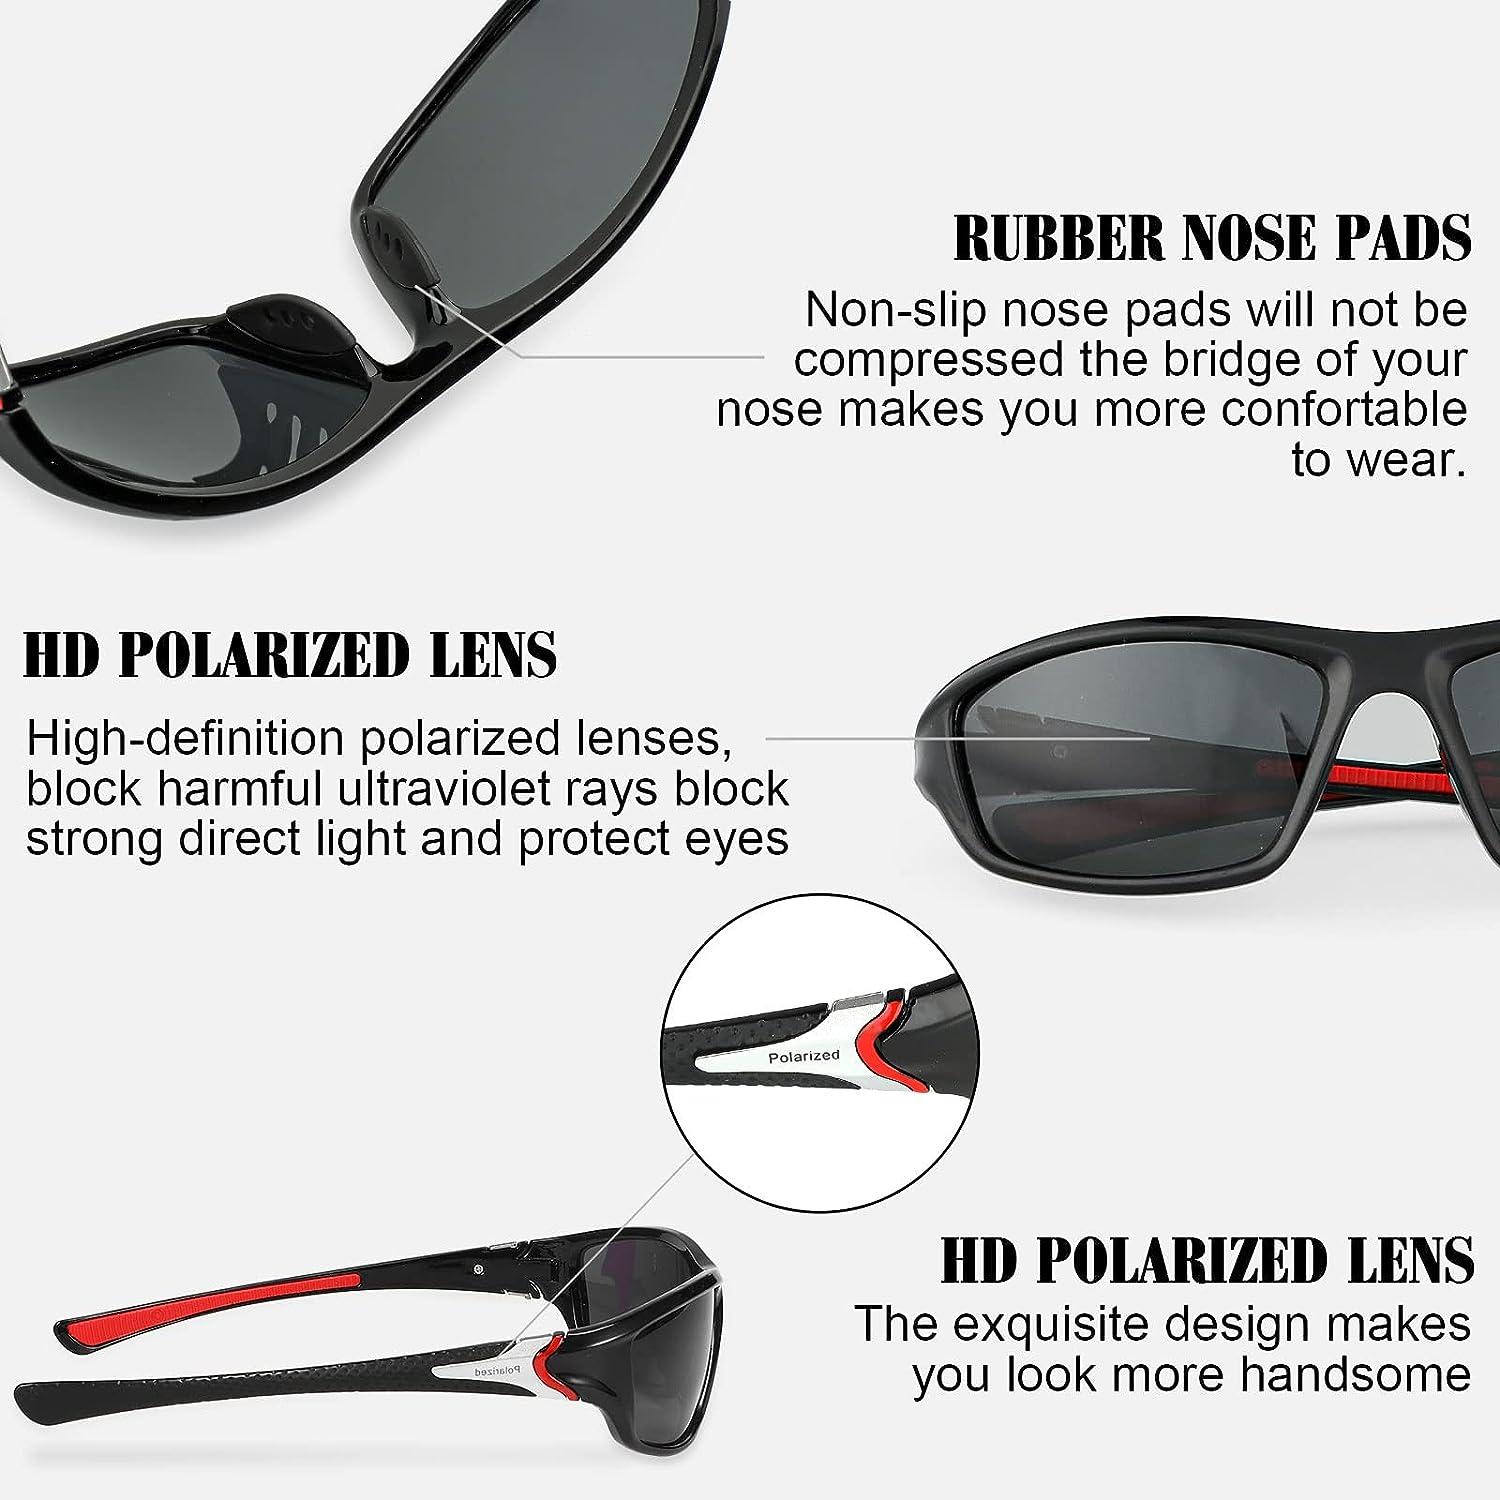 Men's sunglasses: UV protected sunglasses that you must wear